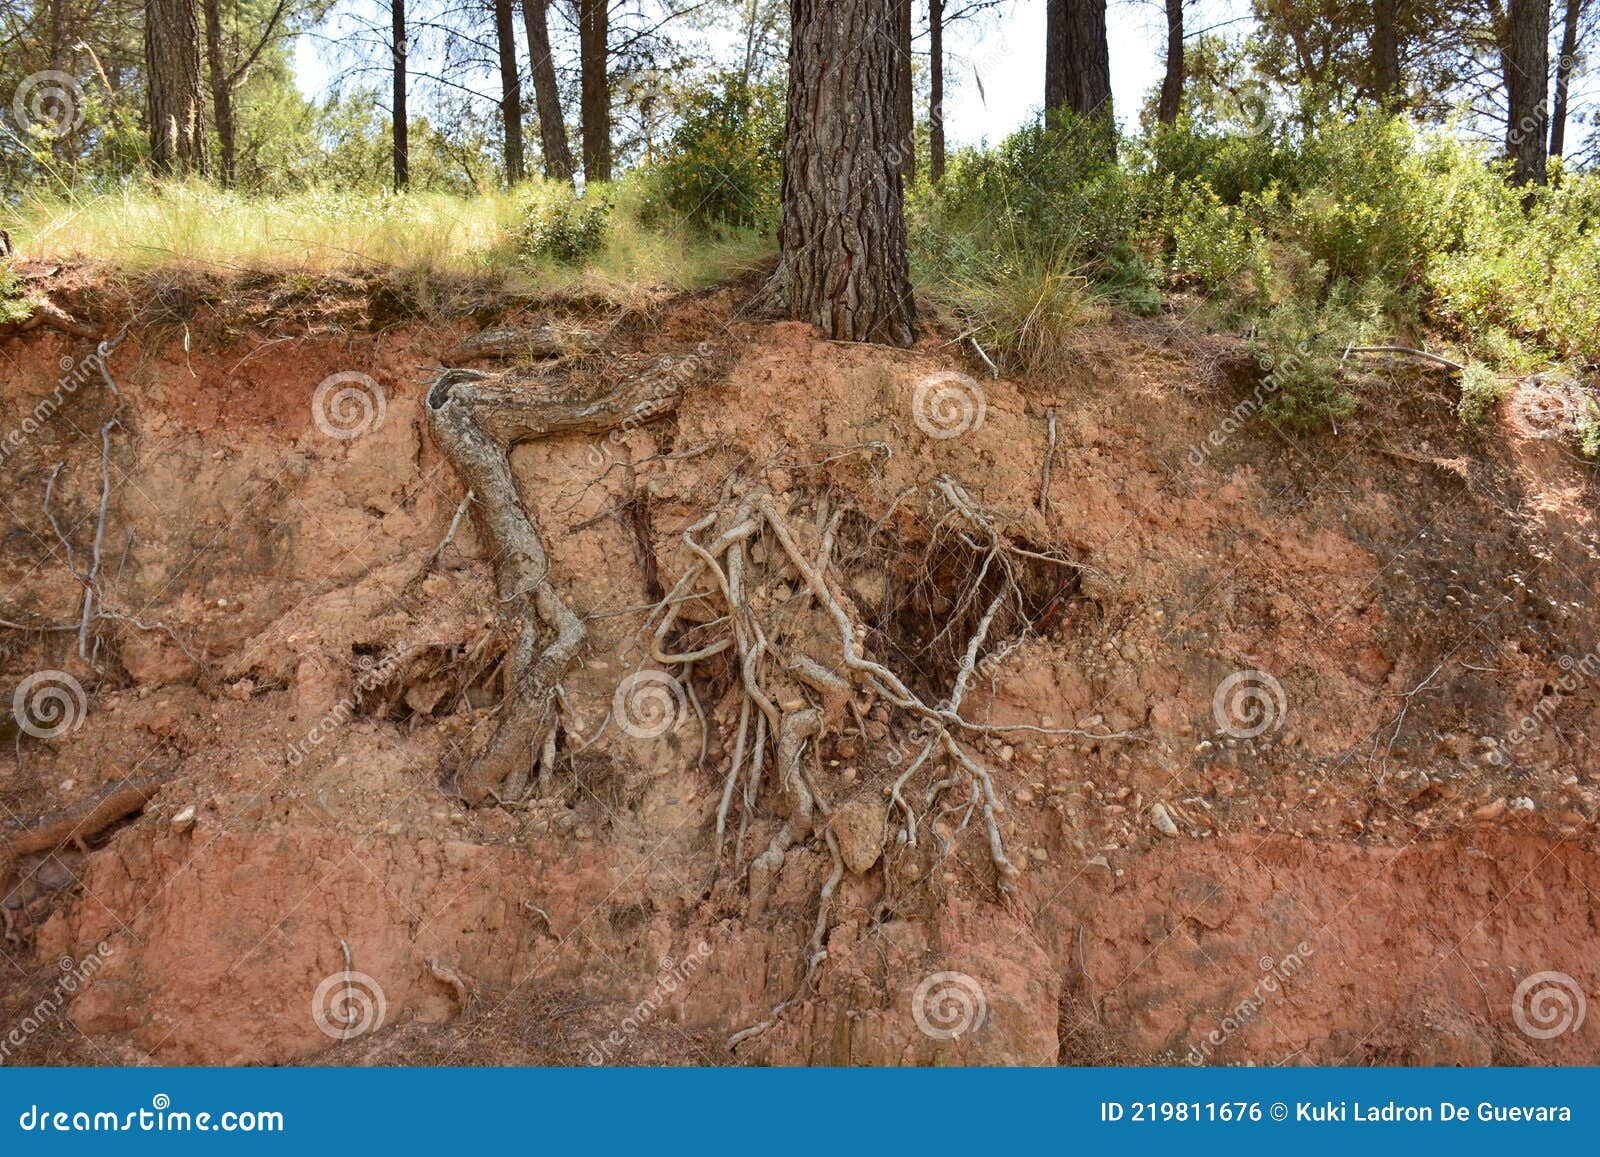 tree with its roots out of the ground